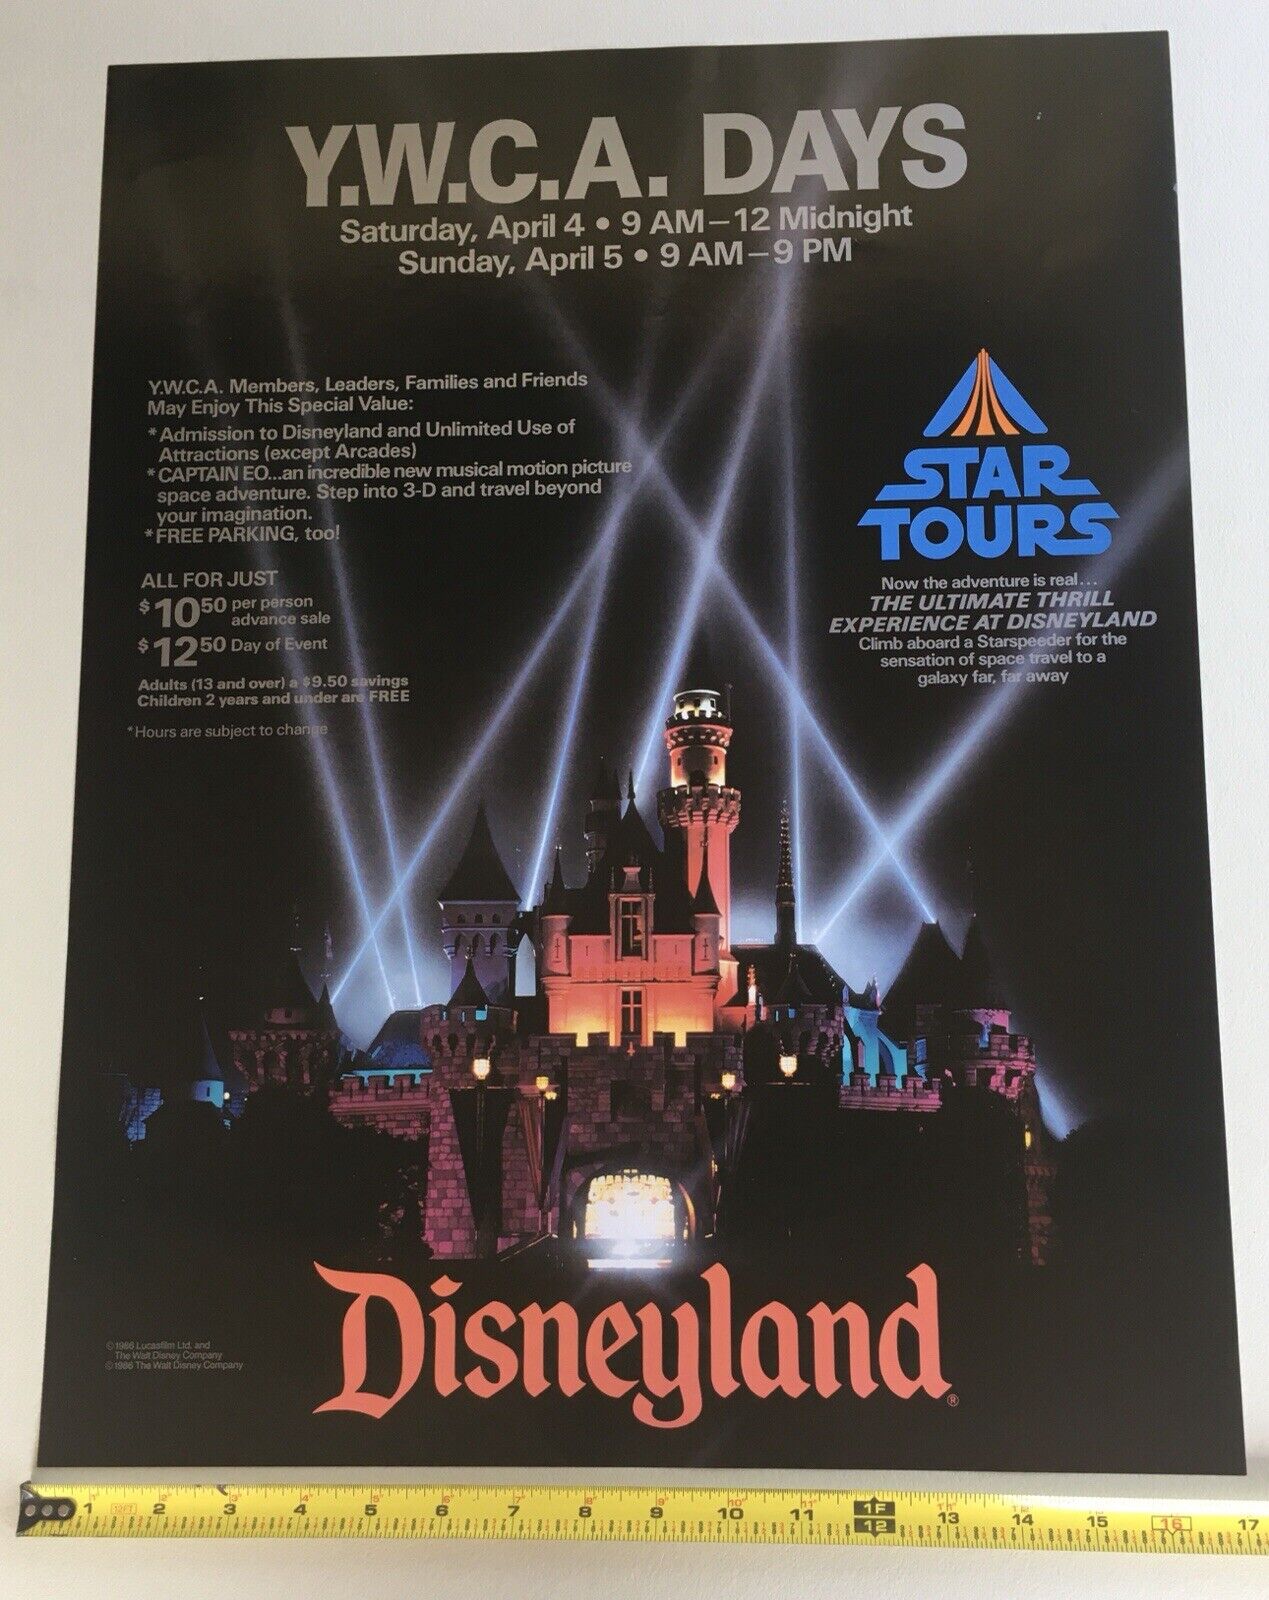 Rare 1986 Y.W.C.A. Party at Disneyland Poster-Star Tour/ Captain EO Opening Year